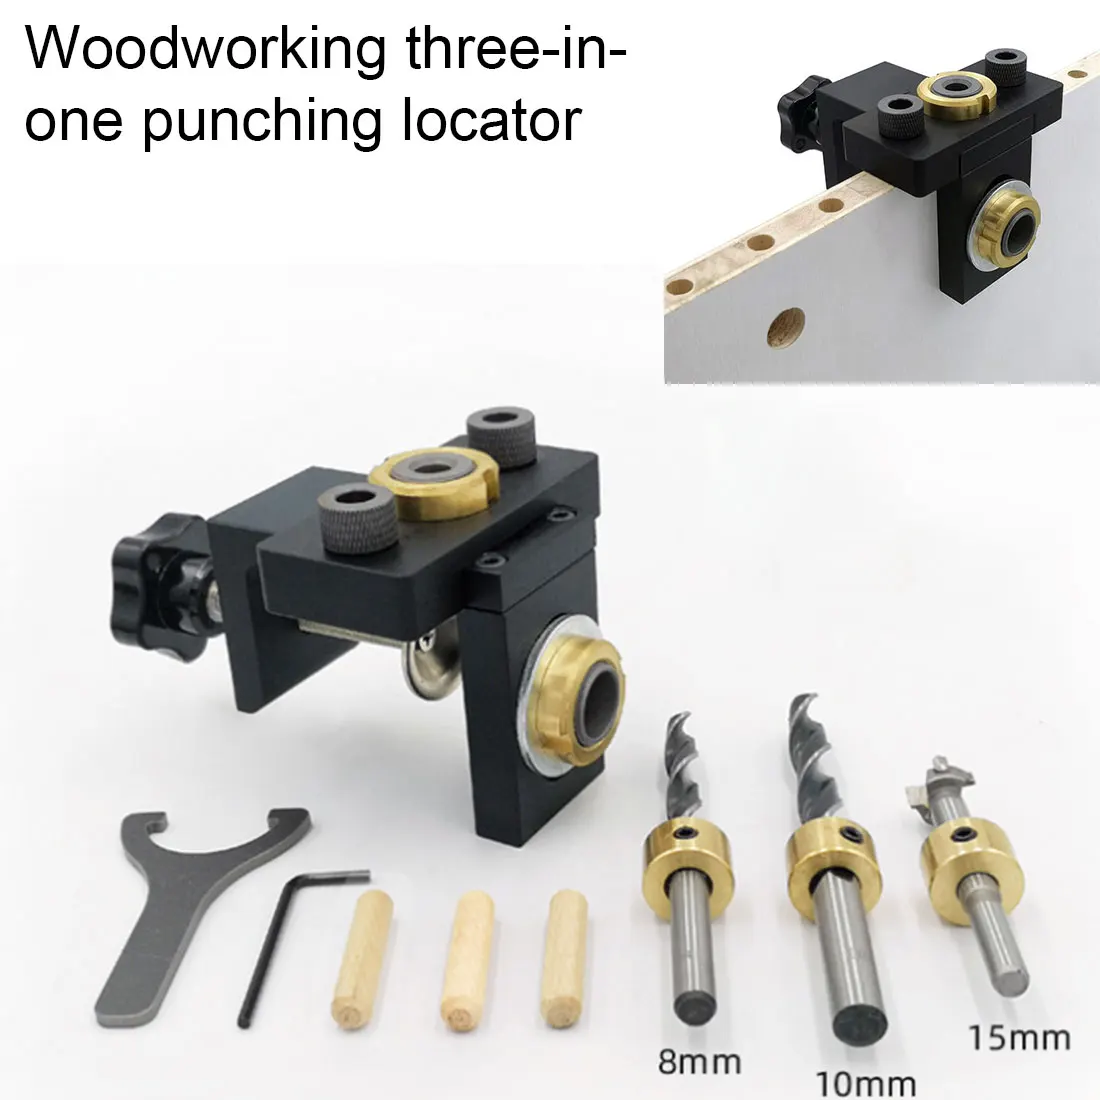 

8/10/15mm Drill Bit Positioning Fixture Hole Kit Drilling Guide Locator 3 in 1 Puncher Tools Wood Vertical Drilling Detachable